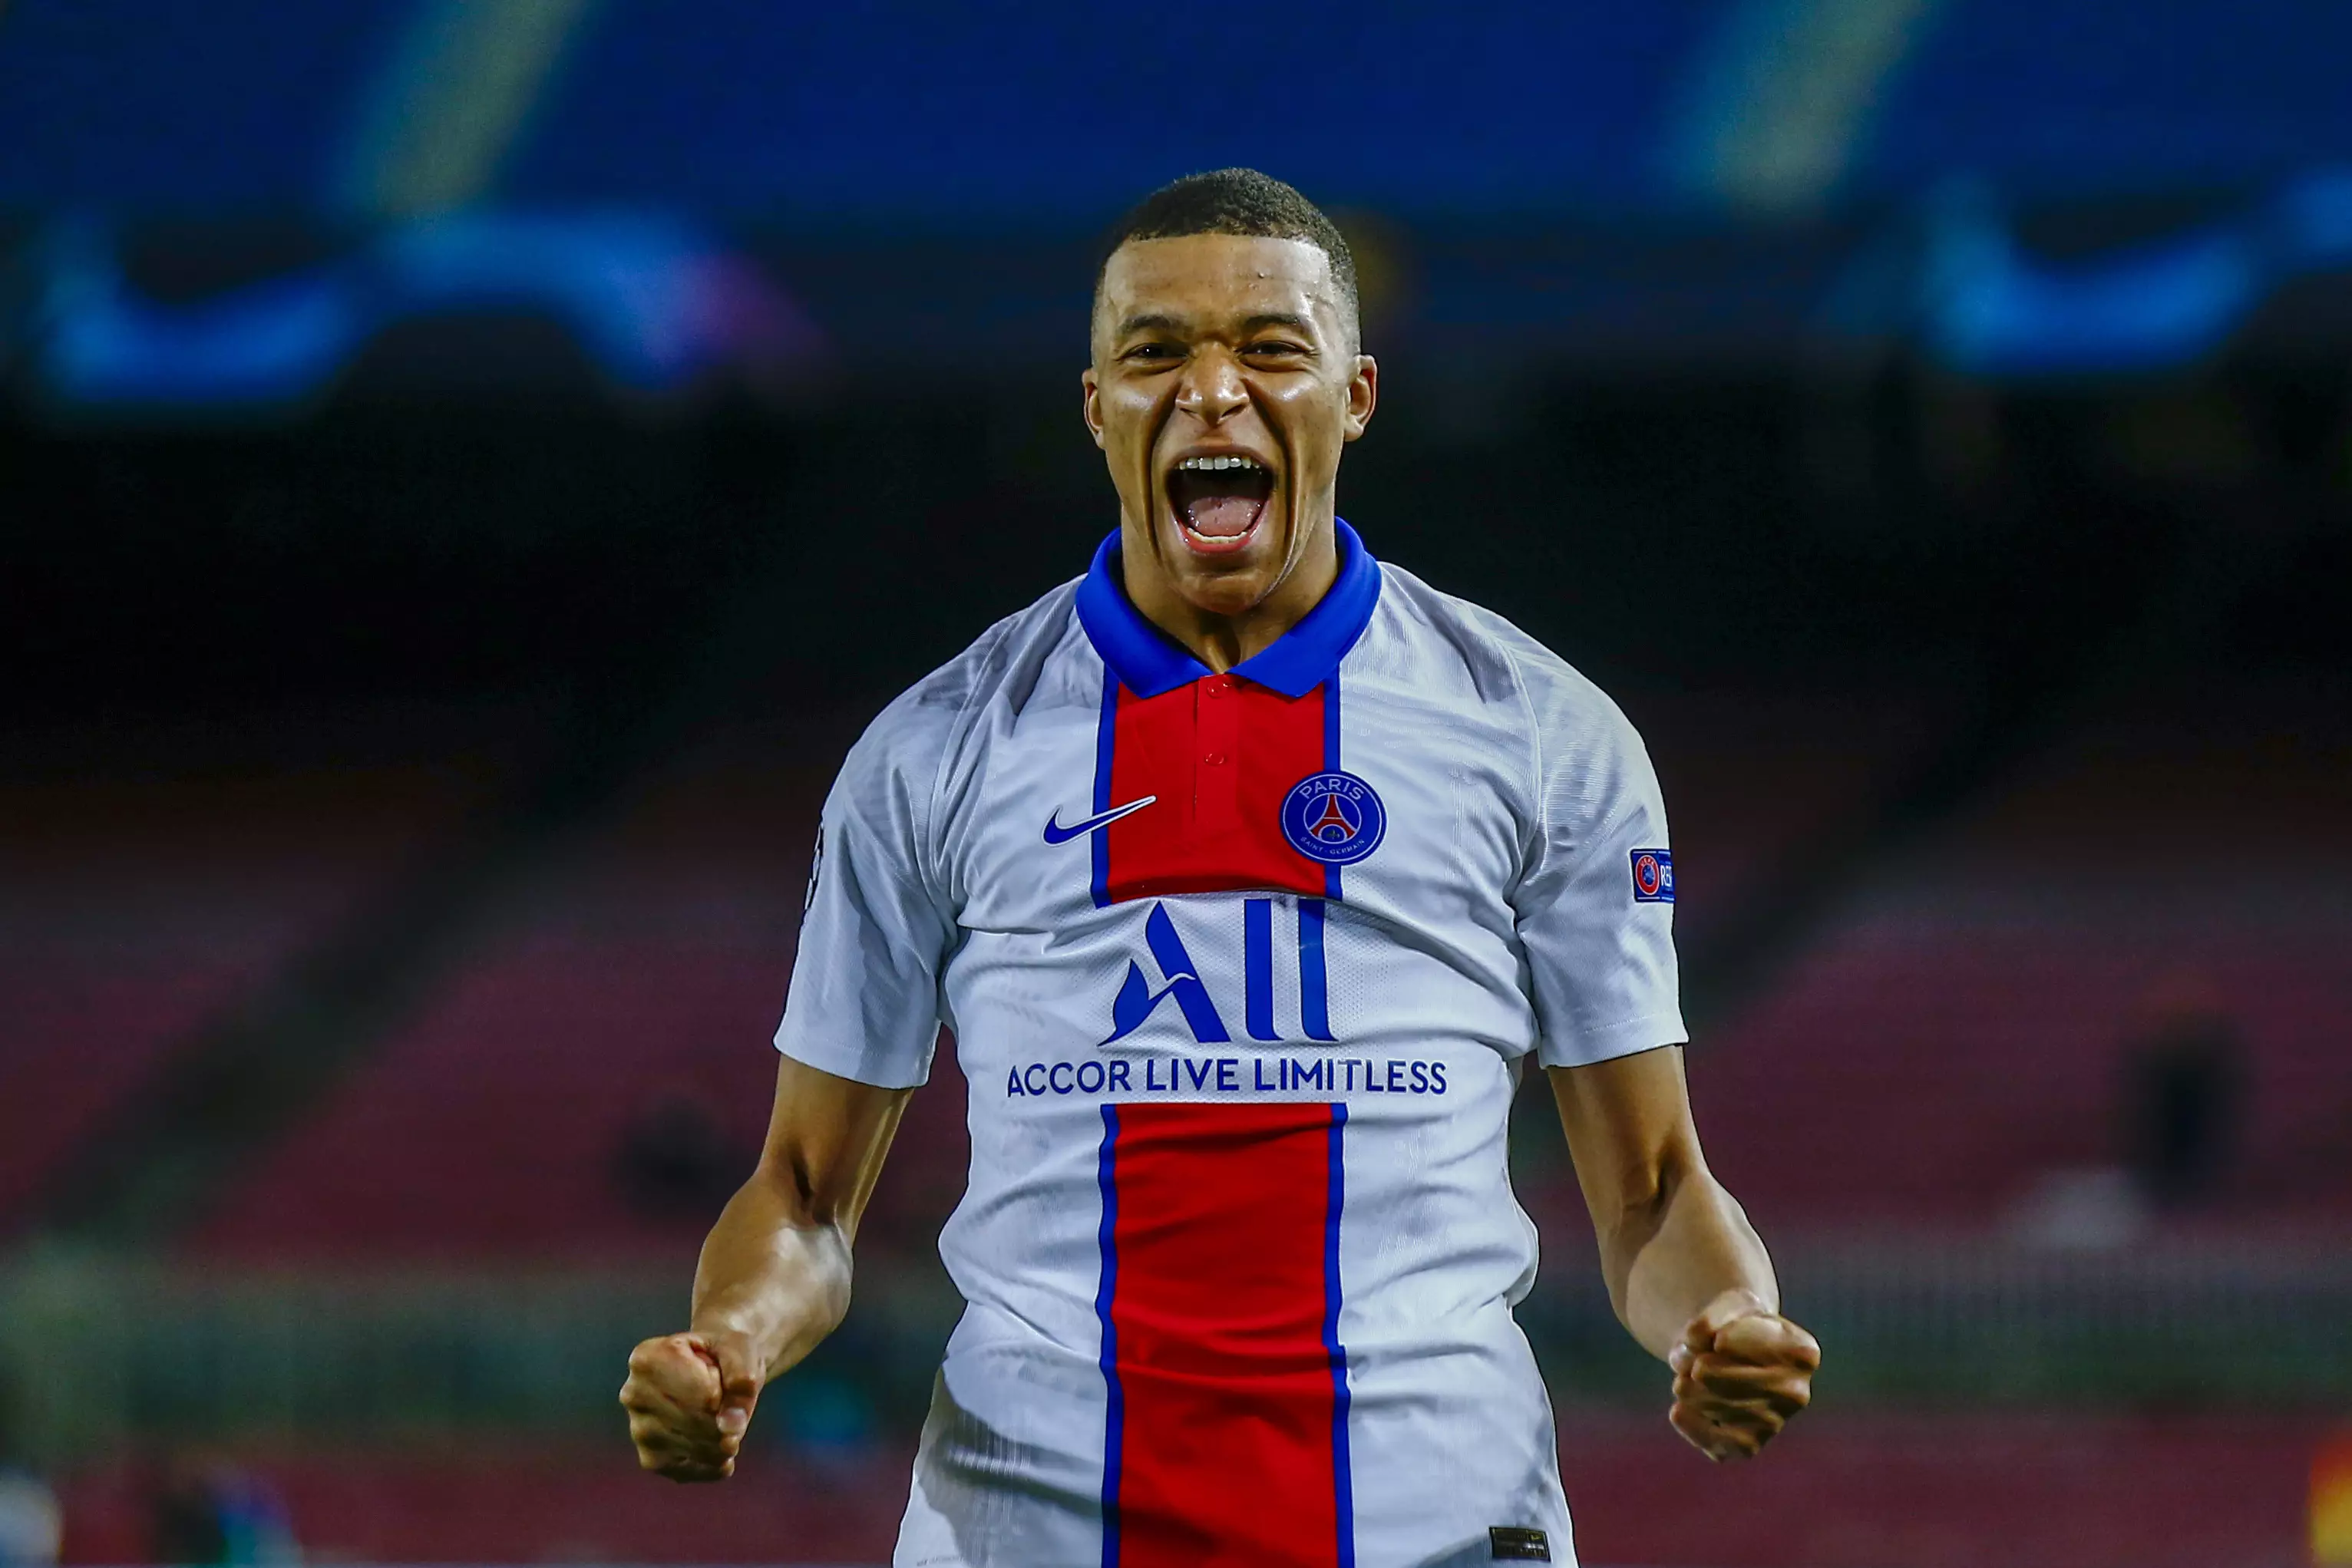 Mbappe's performance in midweek left no questions to his brilliance. Image: PA Images